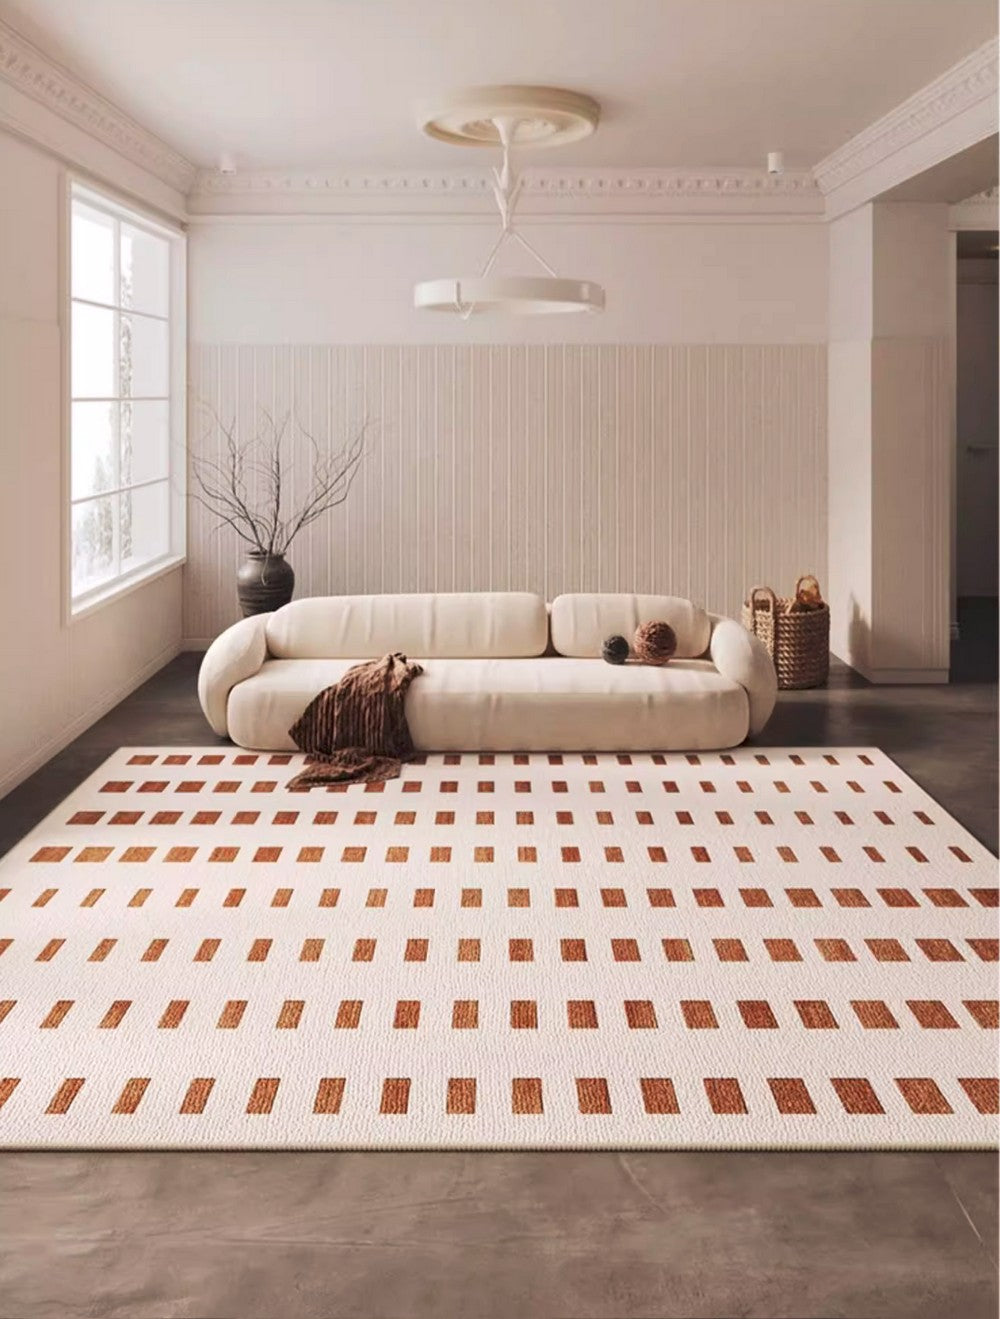 Modern Rug Ideas for Bedroom, Geometric Modern Rug Placement Ideas for Living Room, Contemporary Area Rugs for Dining Room